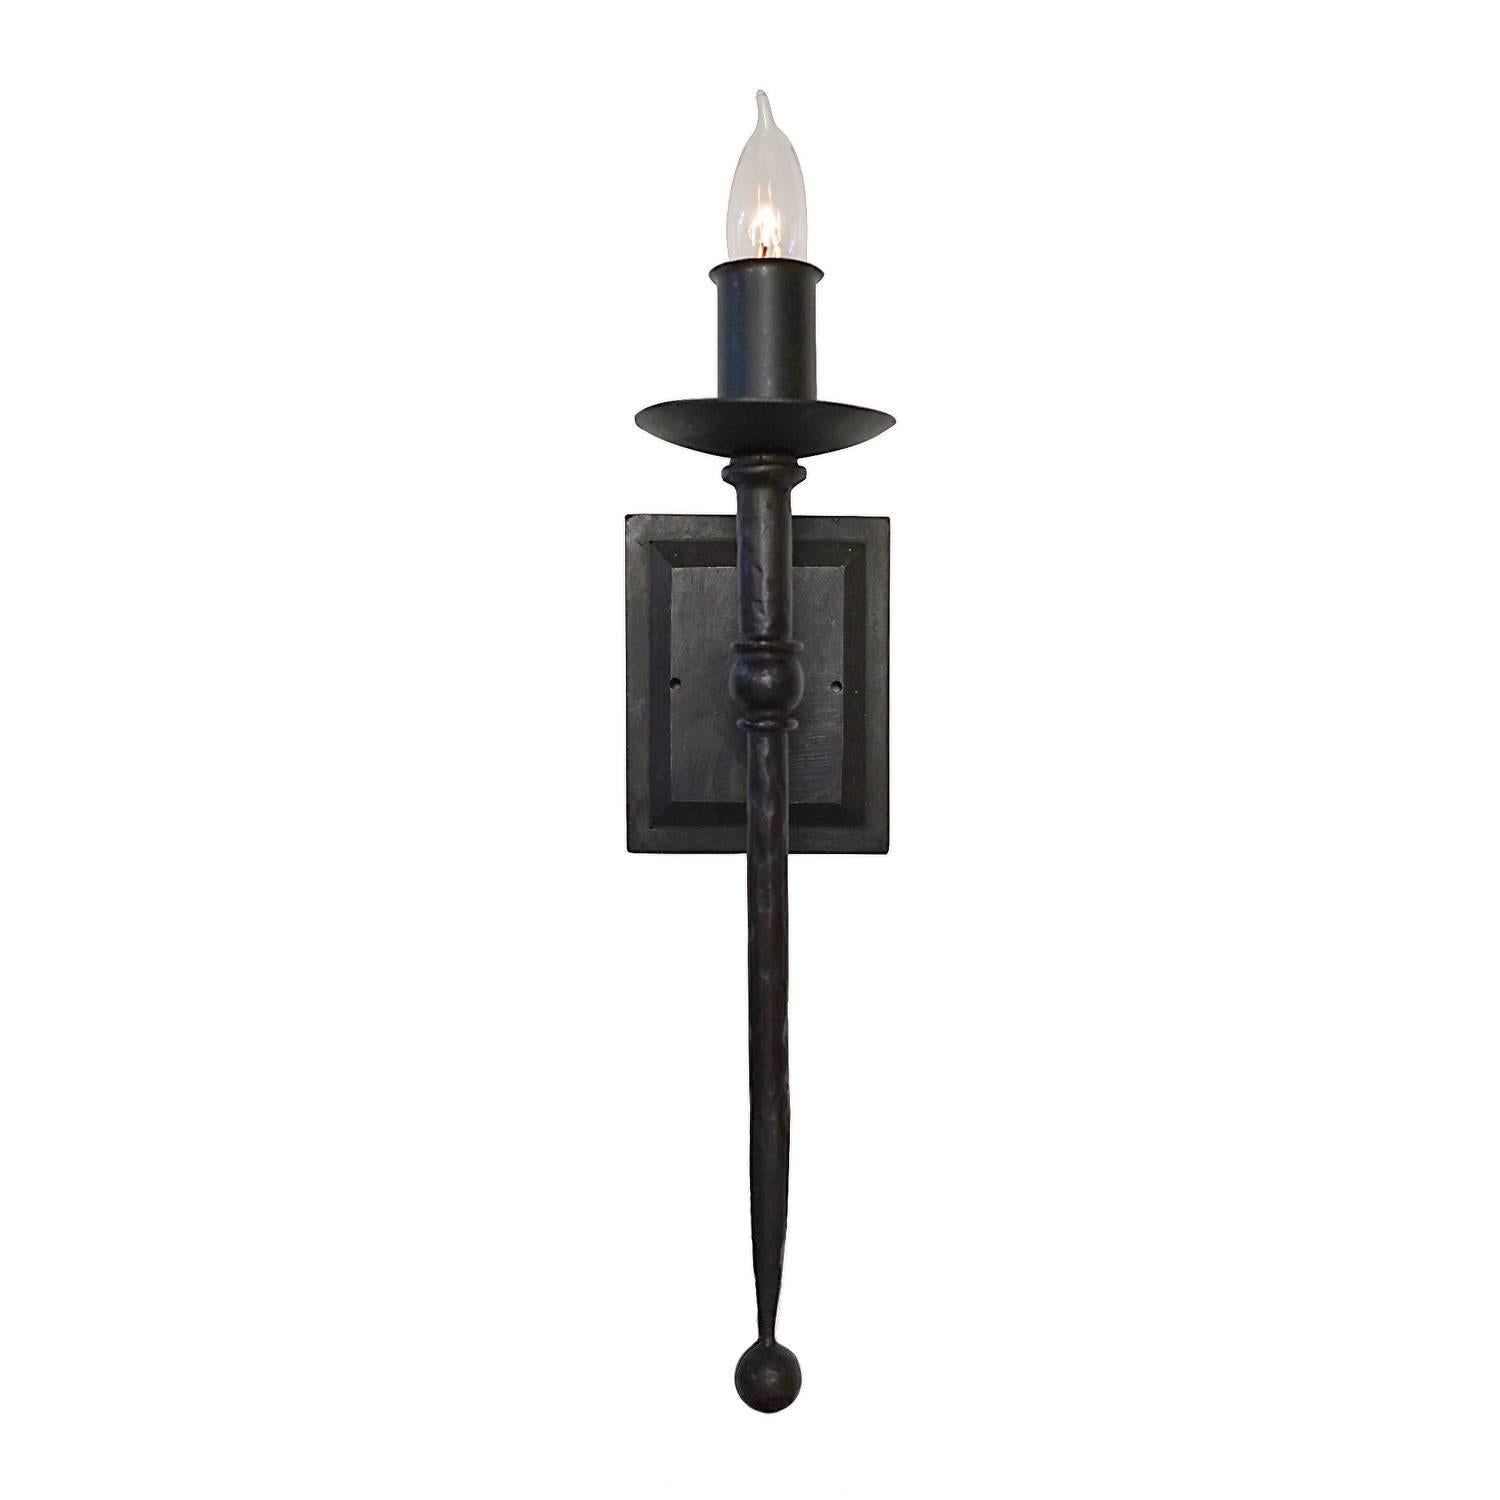 Contemporary Torchiere Wrought Iron Wall Sconce with Spanish Colonial Influence